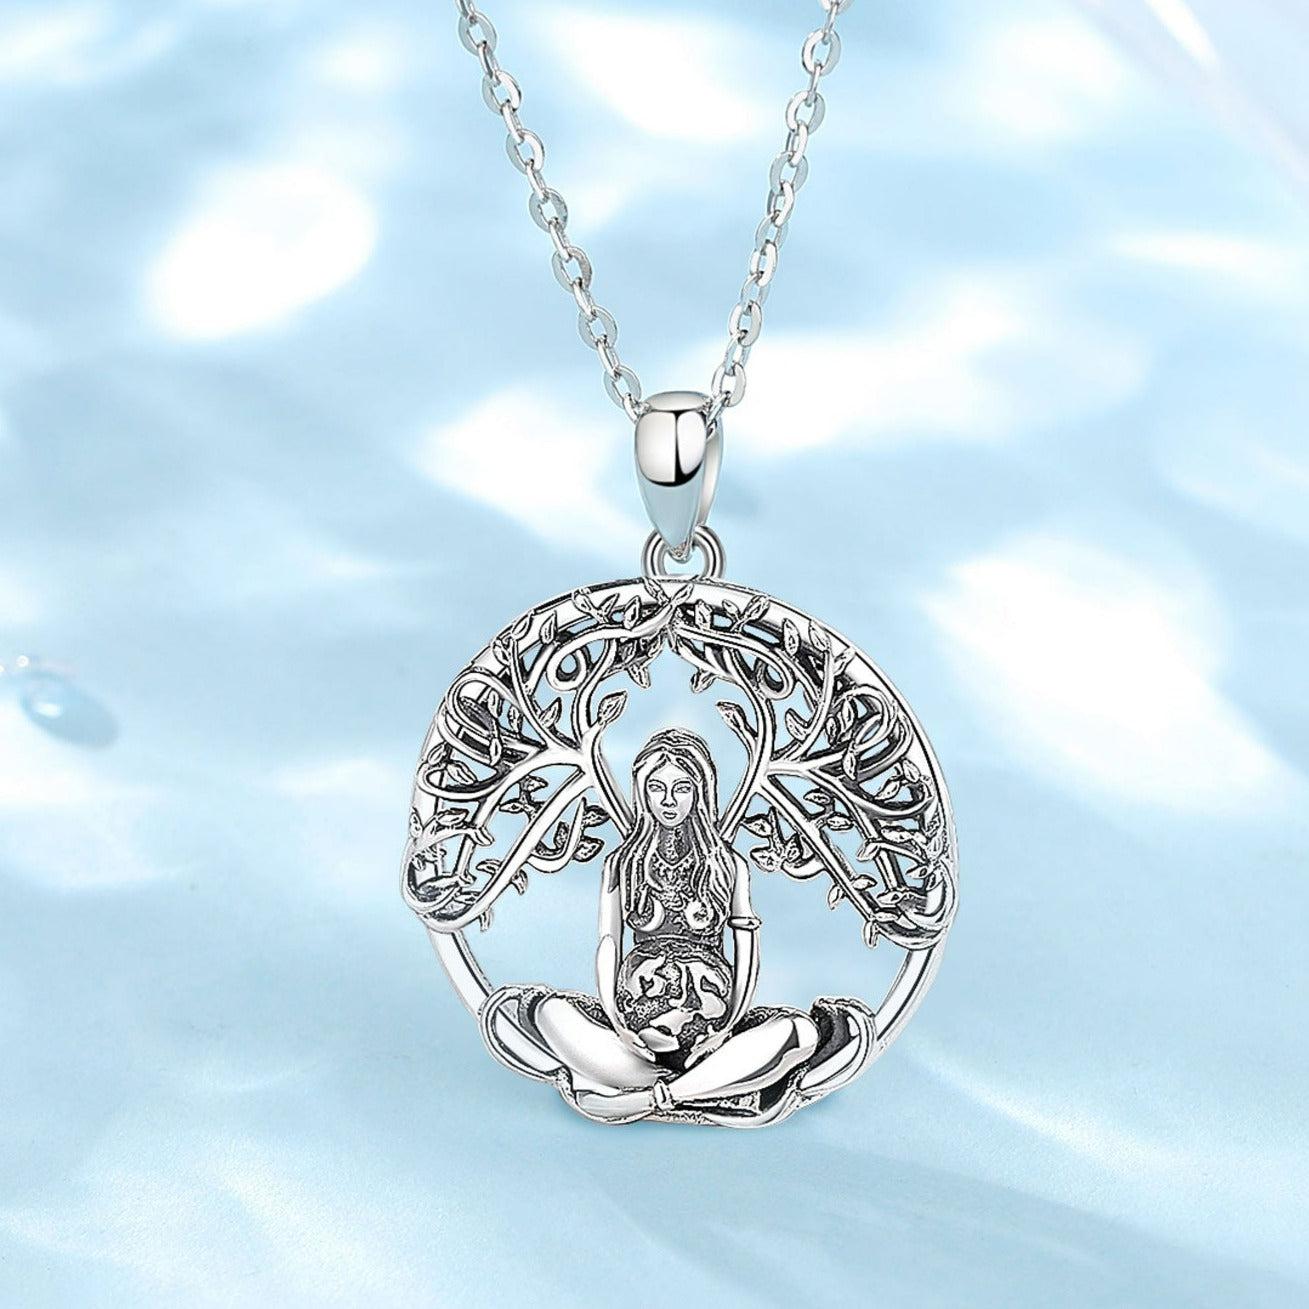 Mother Earth Necklace Pagan Jewelry-MoonChildWorld